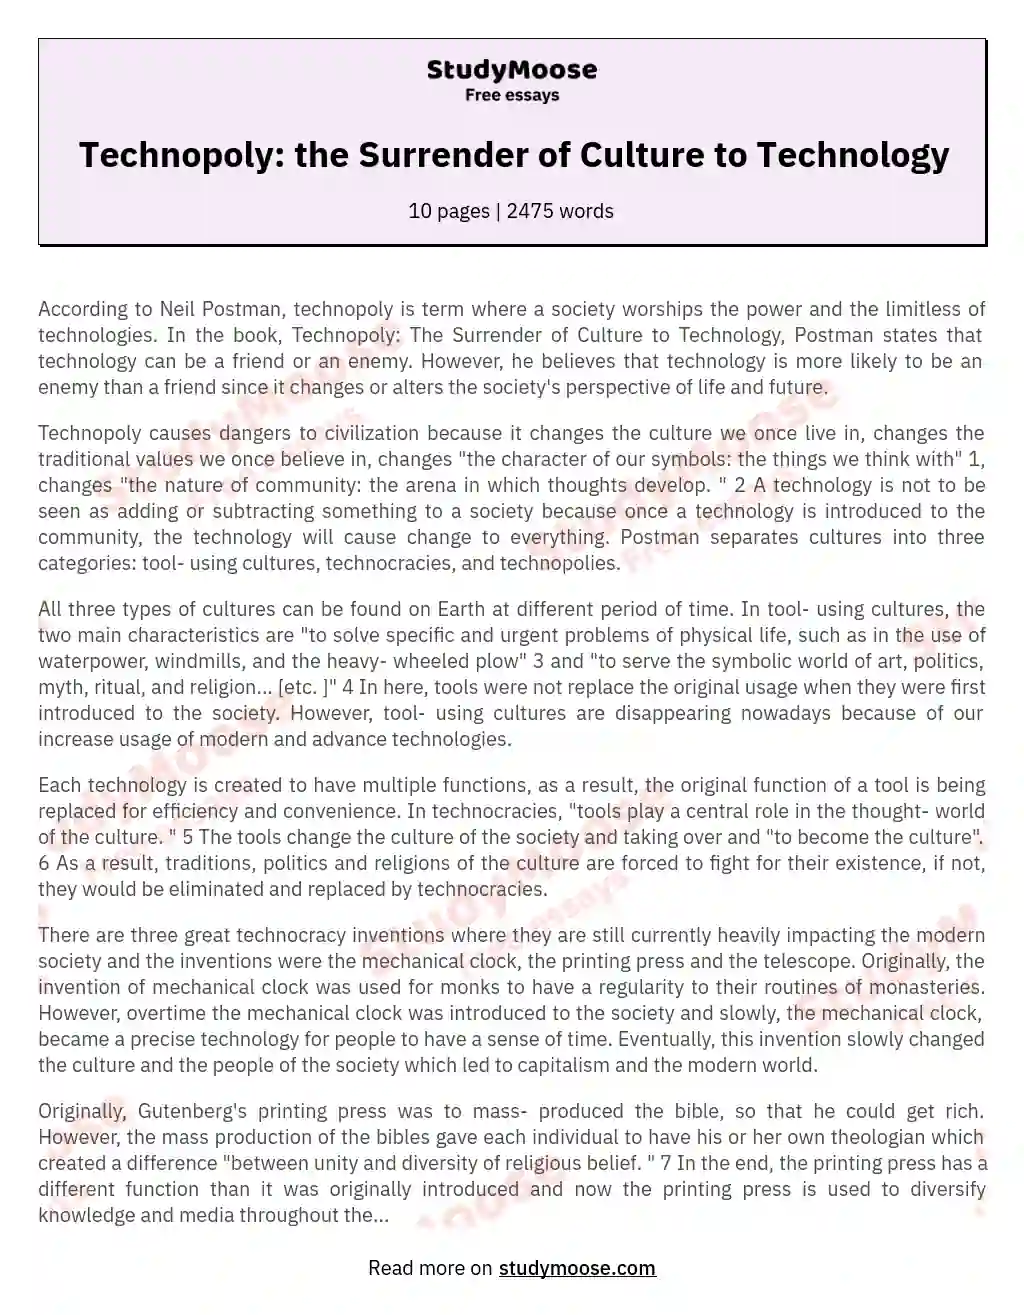 Technopoly: the Surrender of Culture to Technology essay